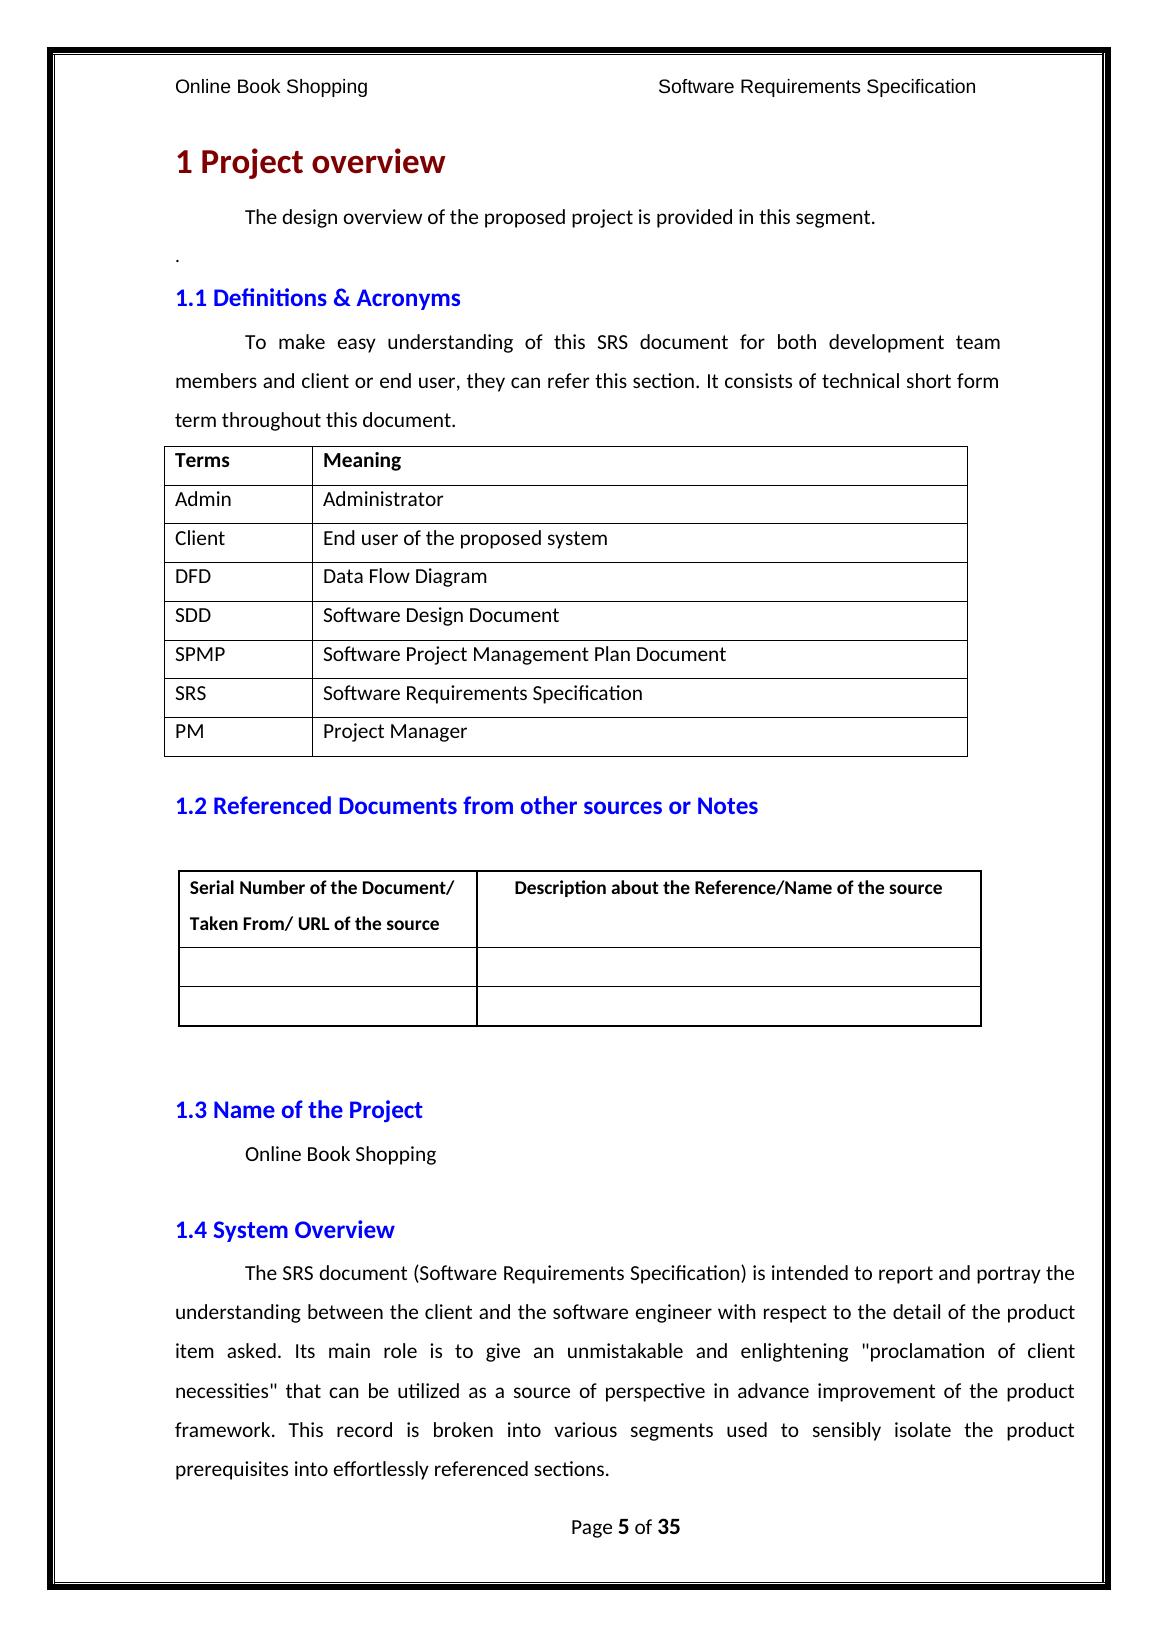 Software Requirements Specification for Online Book Shopping_5